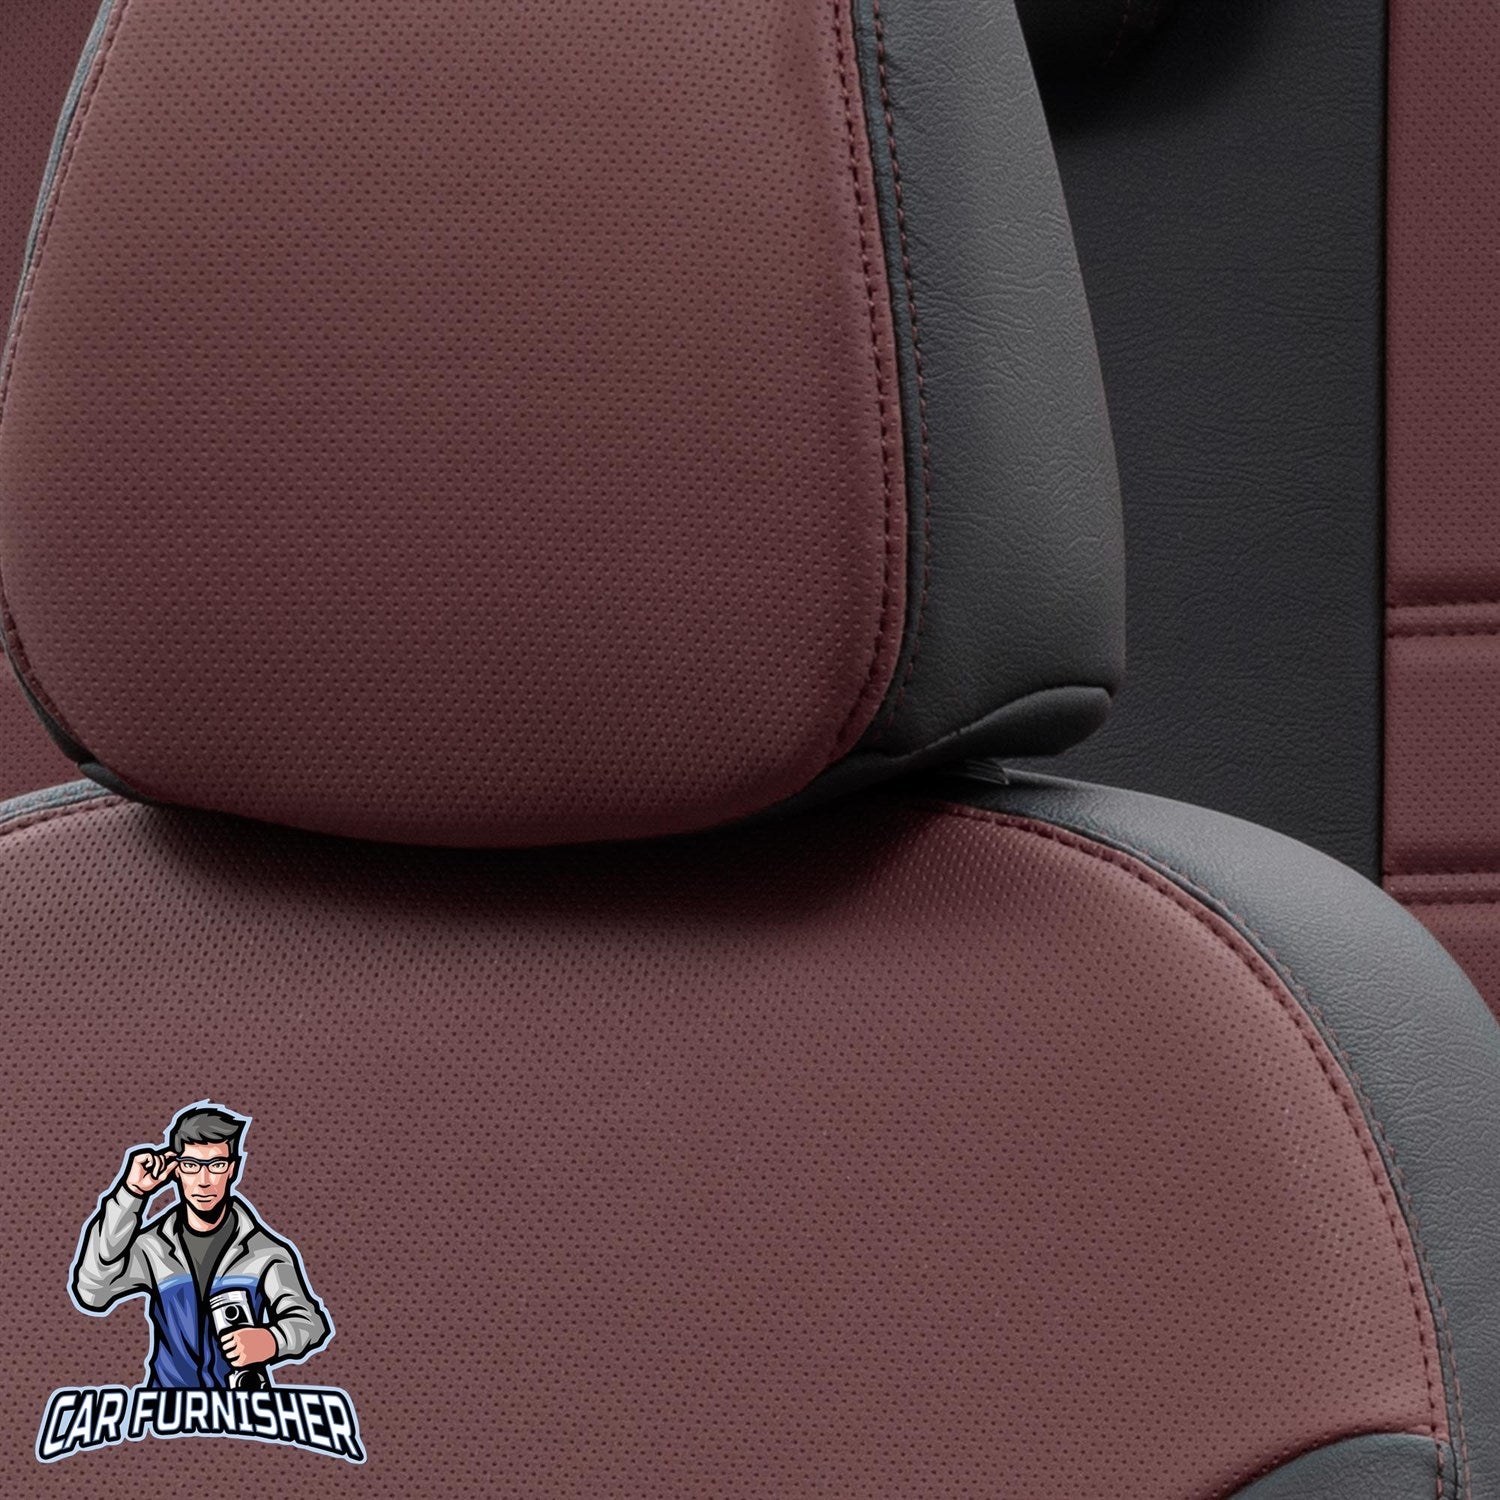 Volvo S60 Car Seat Cover 2000-2018 T4/T5/T6/T8/D5 Istanbul Design Burgundy Full Set (5 Seats + Handrest) Leather & Fabric